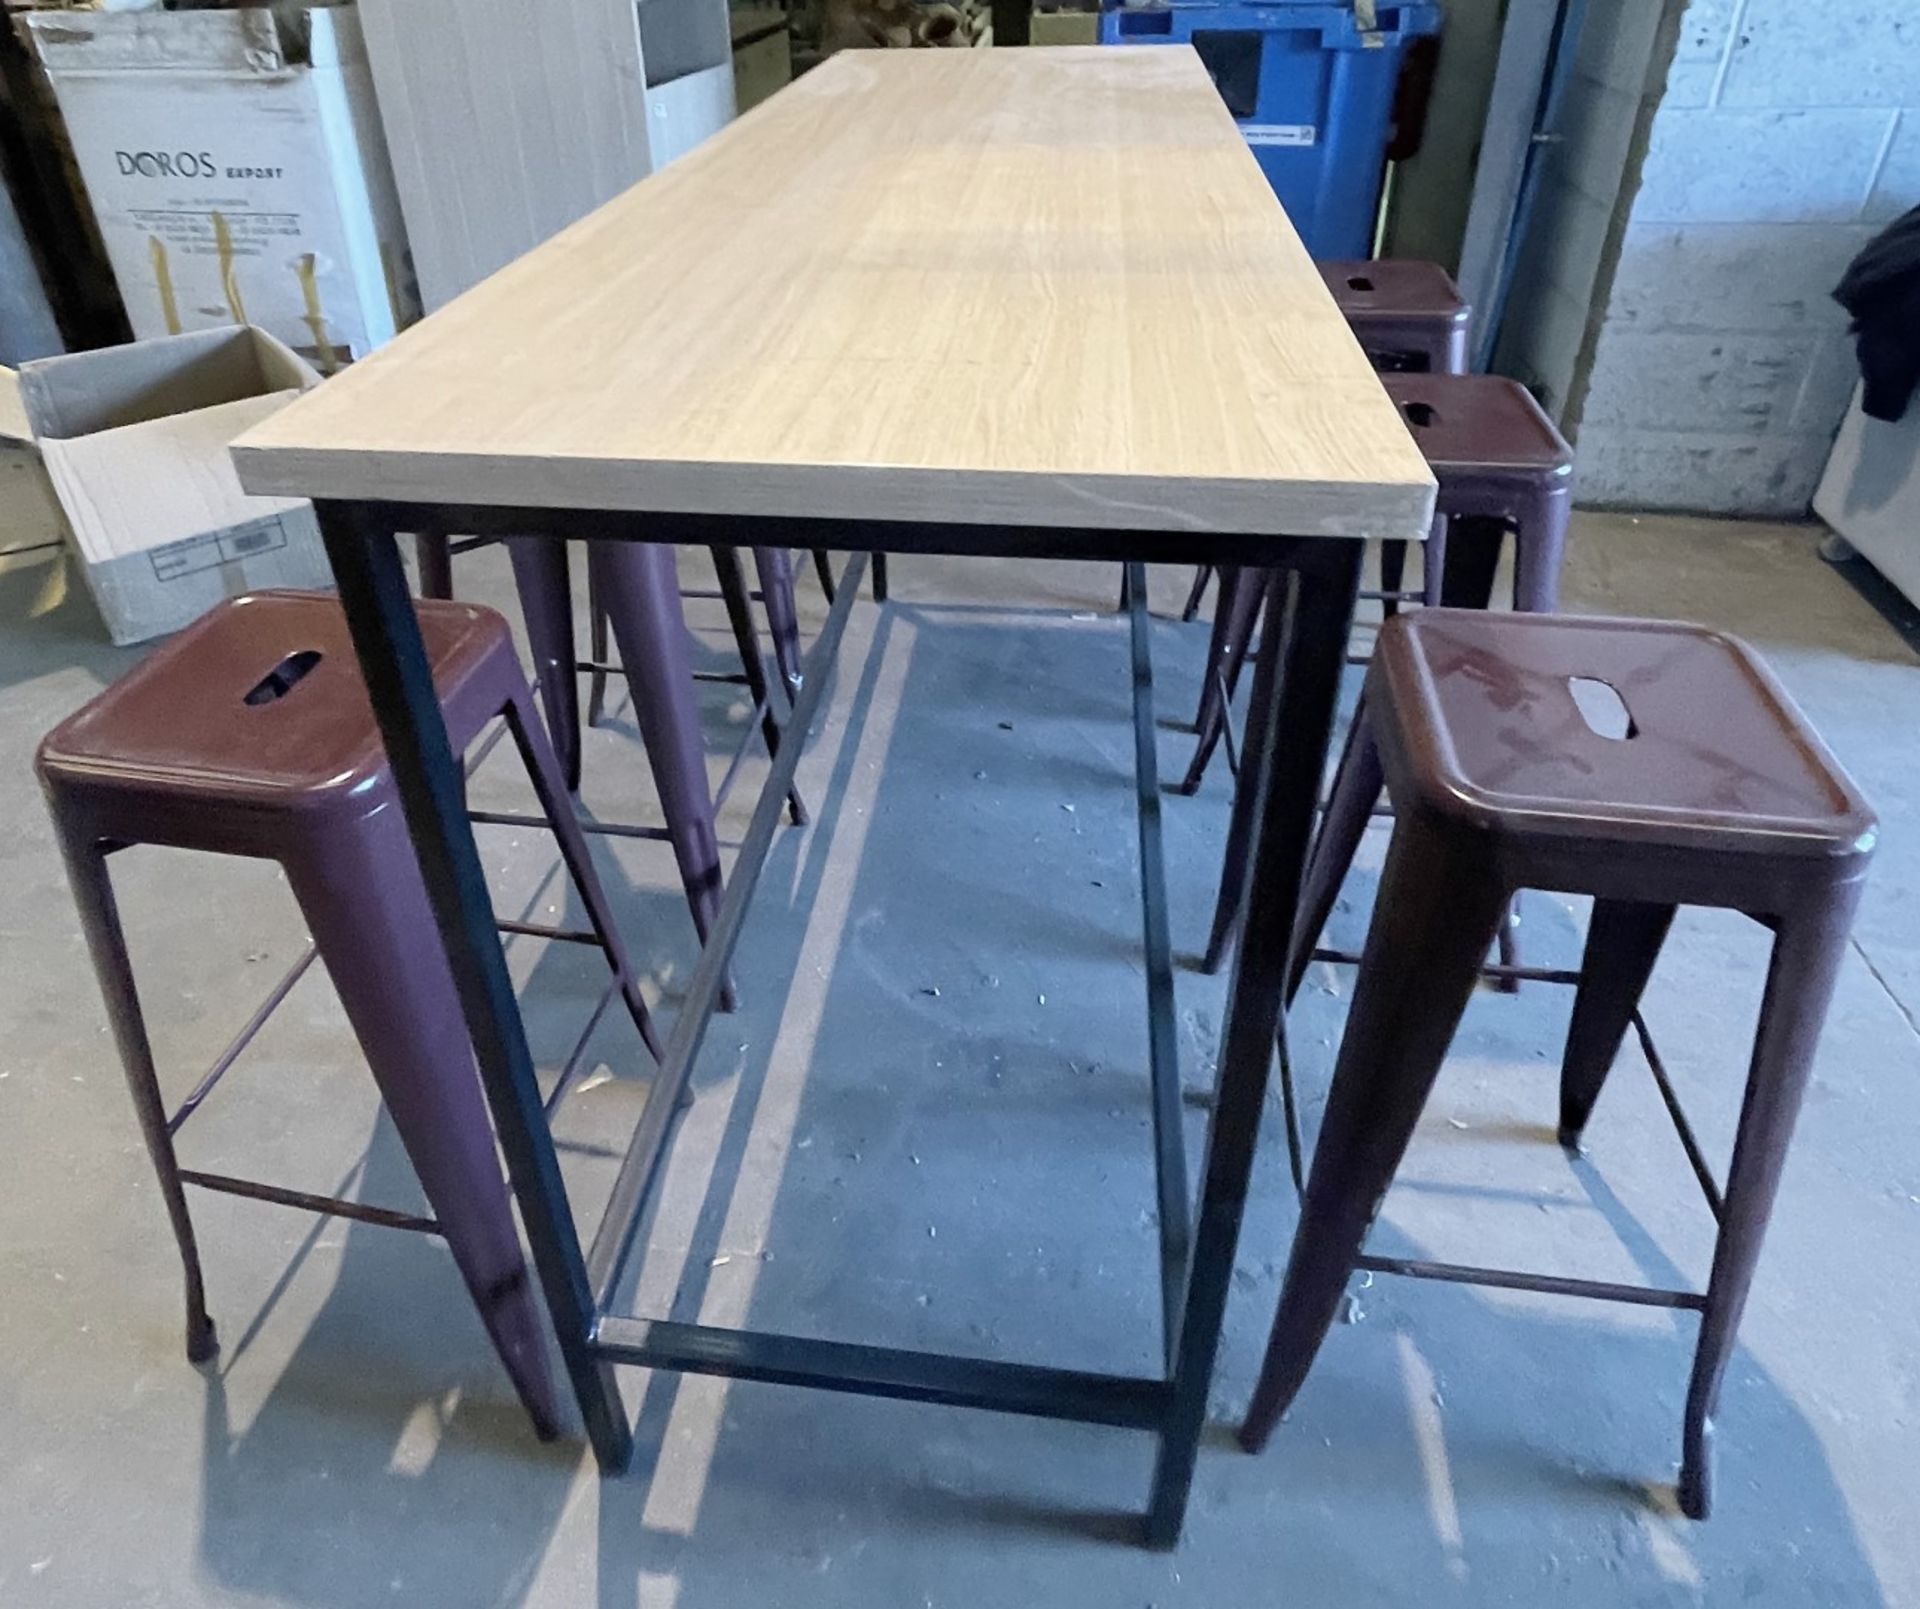 1 x Rectangular Bar Table And 6 x Metal Bar Stools - Ref: FGN068 - CL834 - Location: Essex, RM19 Dim - Image 3 of 9